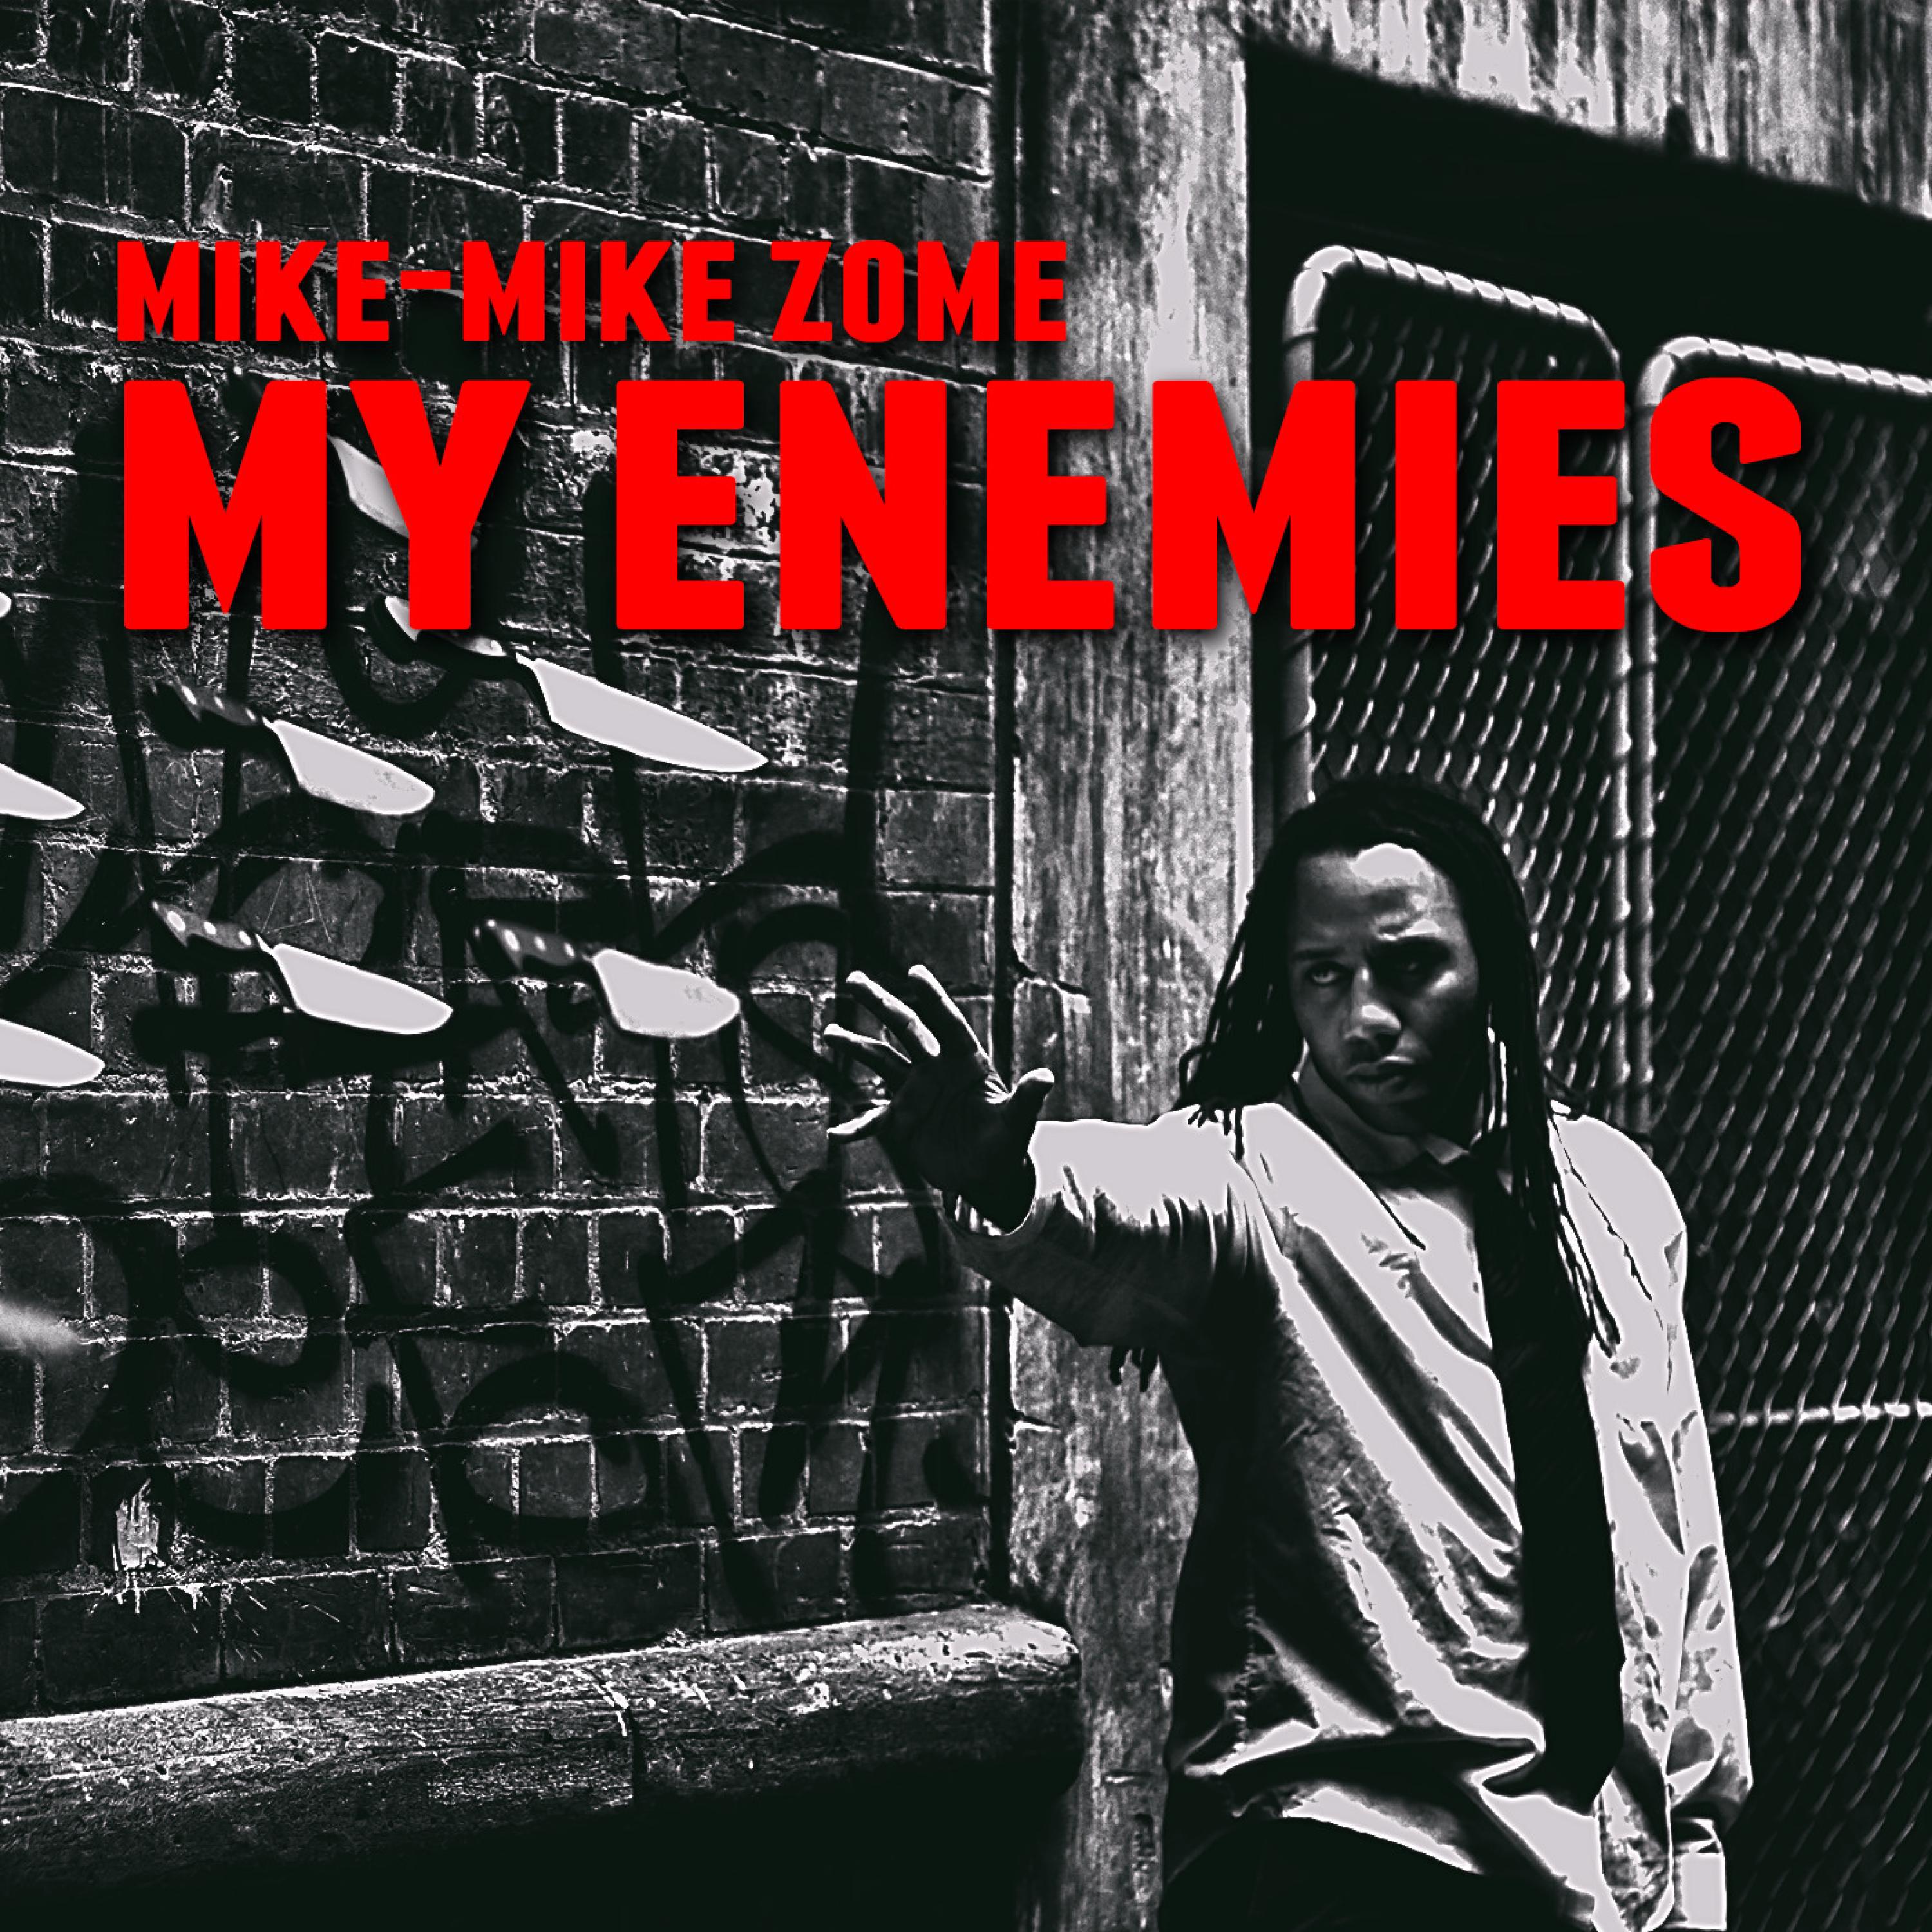 Mike-Mike Zome - My Enemies